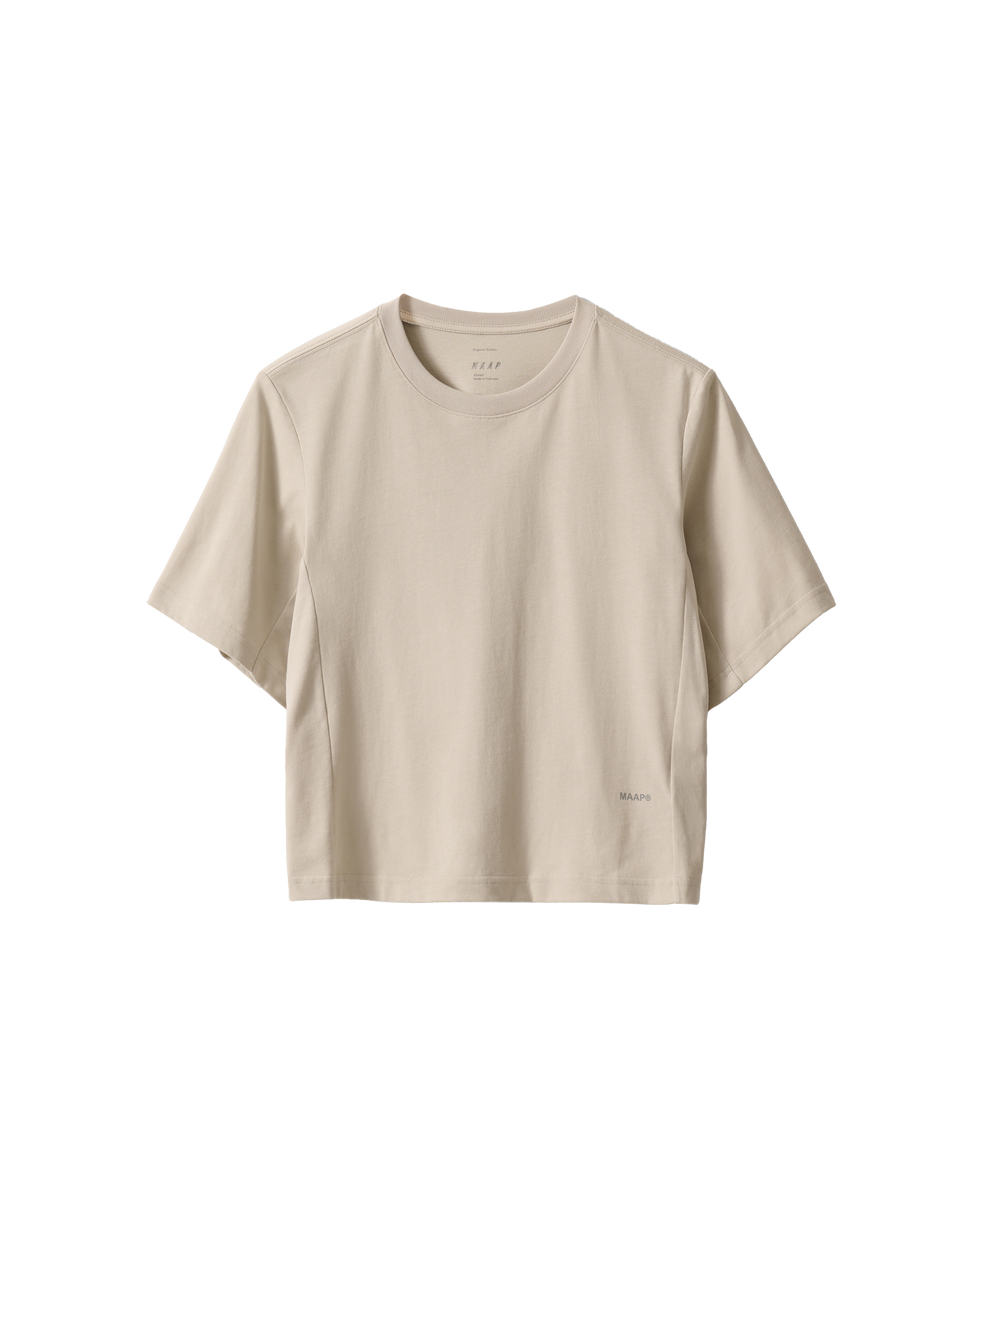 Product Image for Women's Essentials Tee